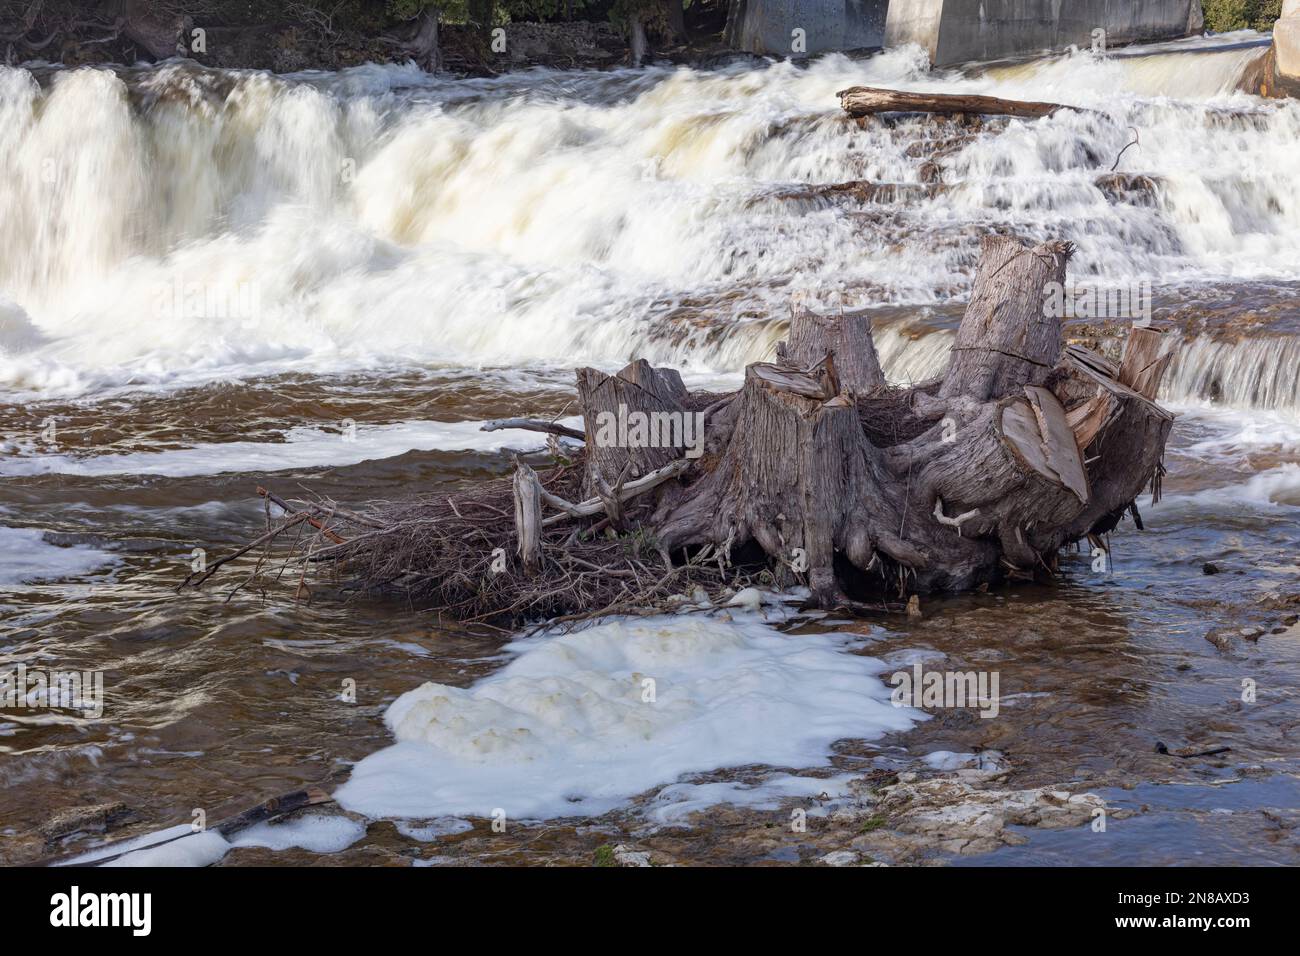 Rough and stationary tree stumps contrast against the soft smooth flow of the water below McGowan Falls at Durham in Ontario, Canada. Stock Photo